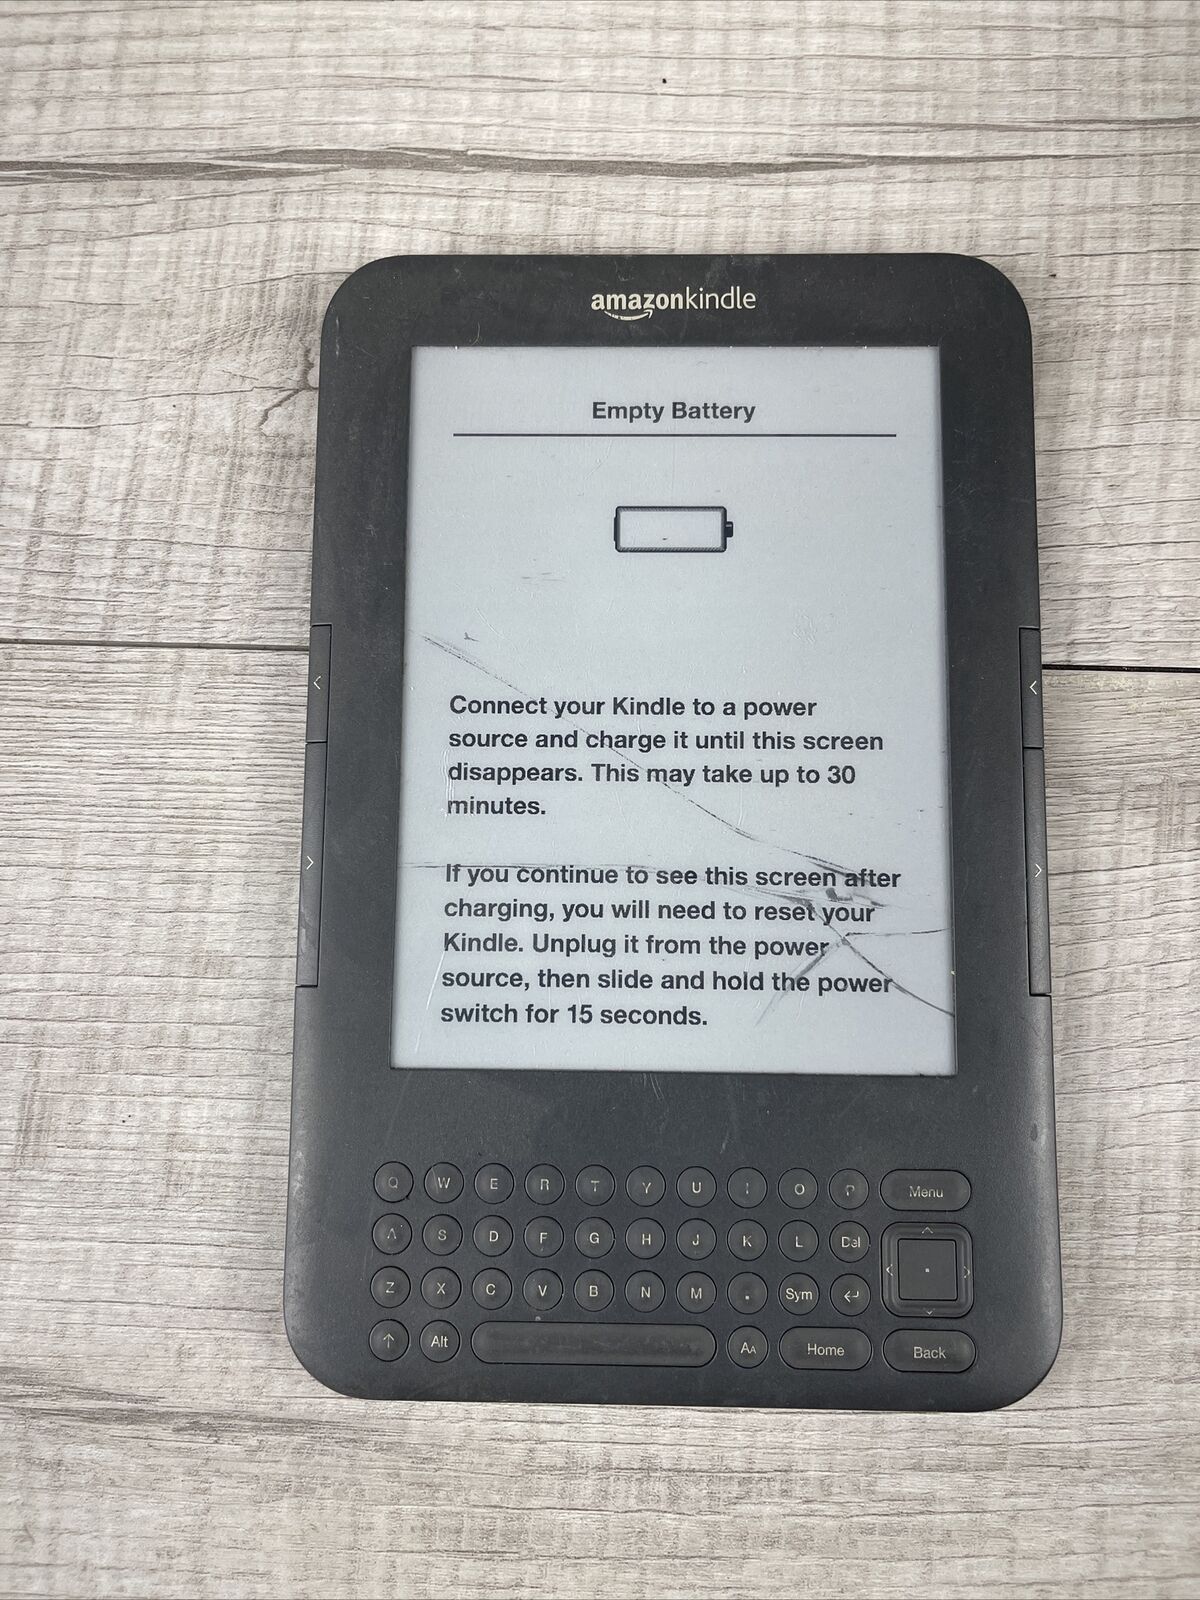 For Parts/Repair: Amazon Kindle 3rd Generation - D00901 - eBook Reader